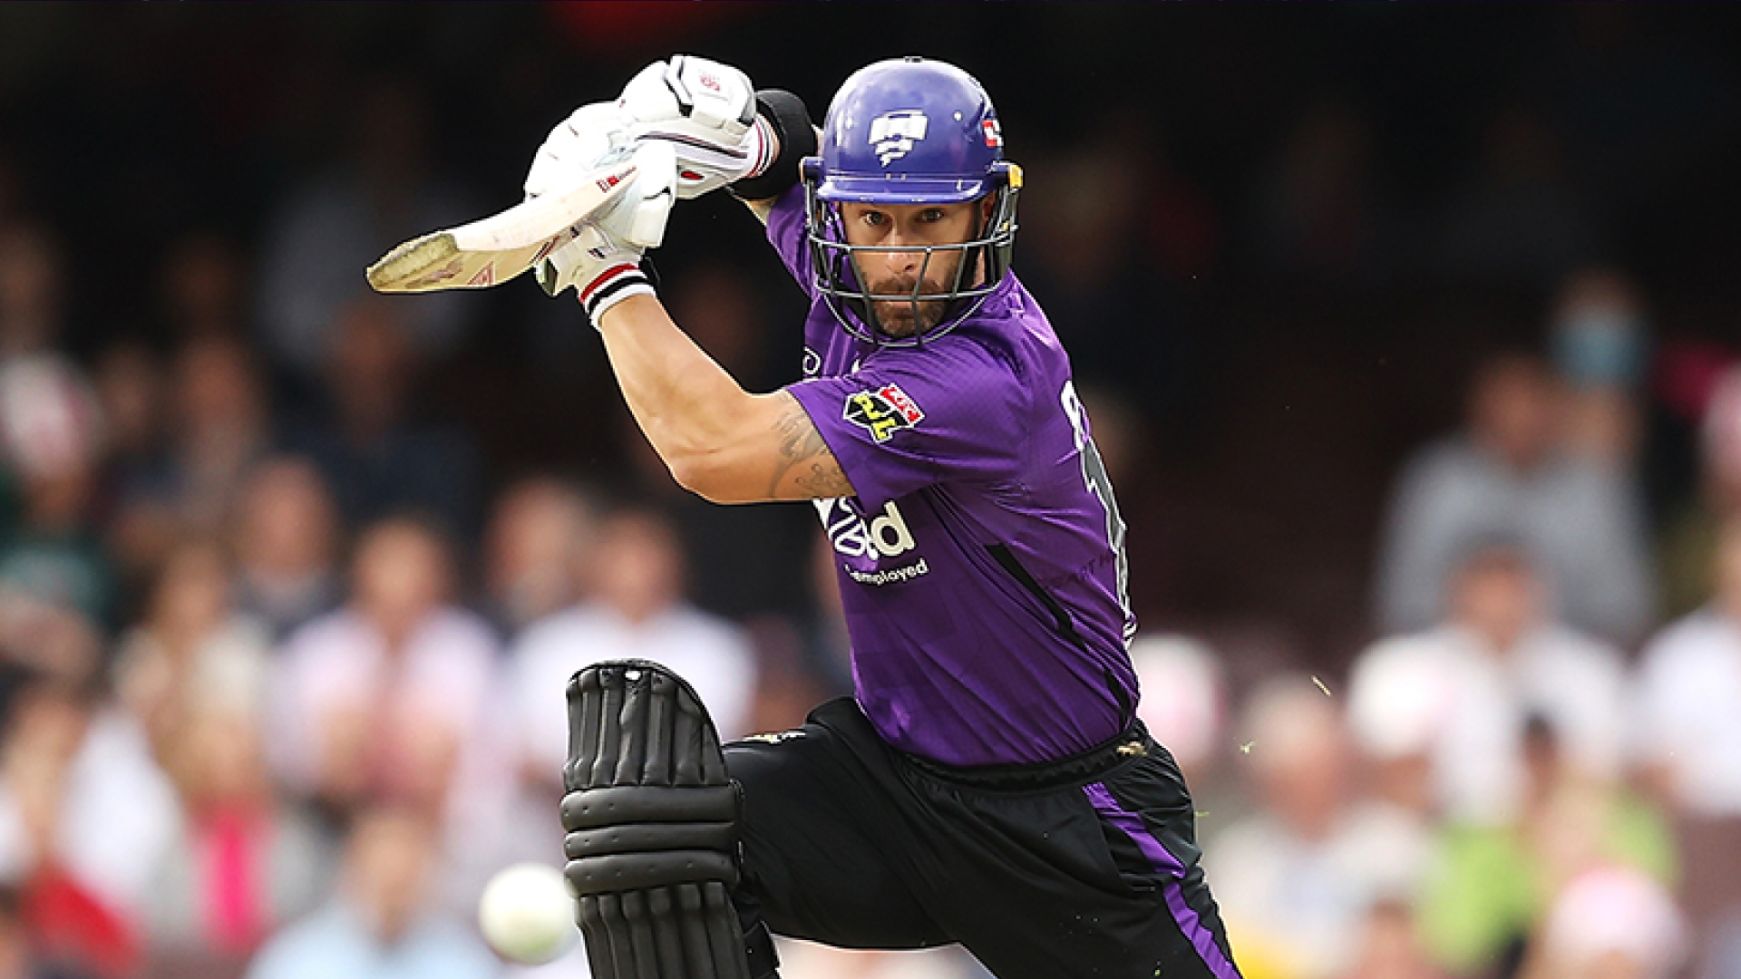 BBL 11 | Matthew Wade’s captain’s knock and bowlers guide Renegades to victory past Sixers